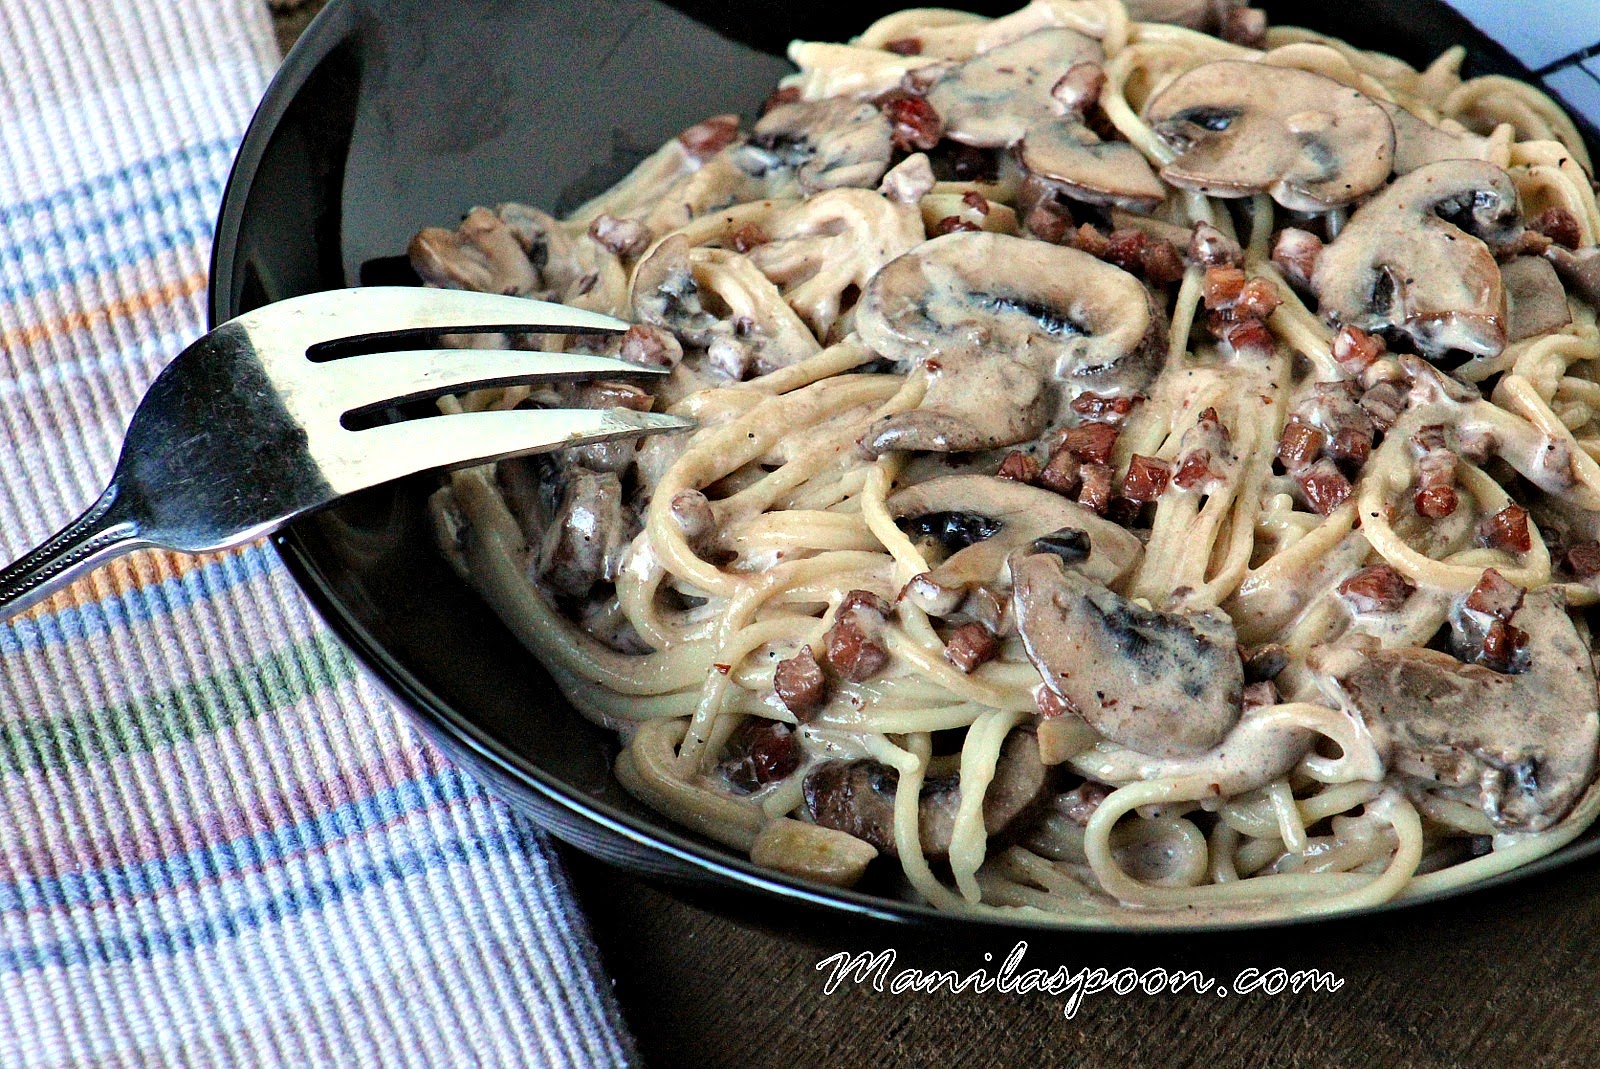 You can never go wrong with bacon and mushrooms! This creamy and delicious pasta with pancetta is our comfort food for sure.